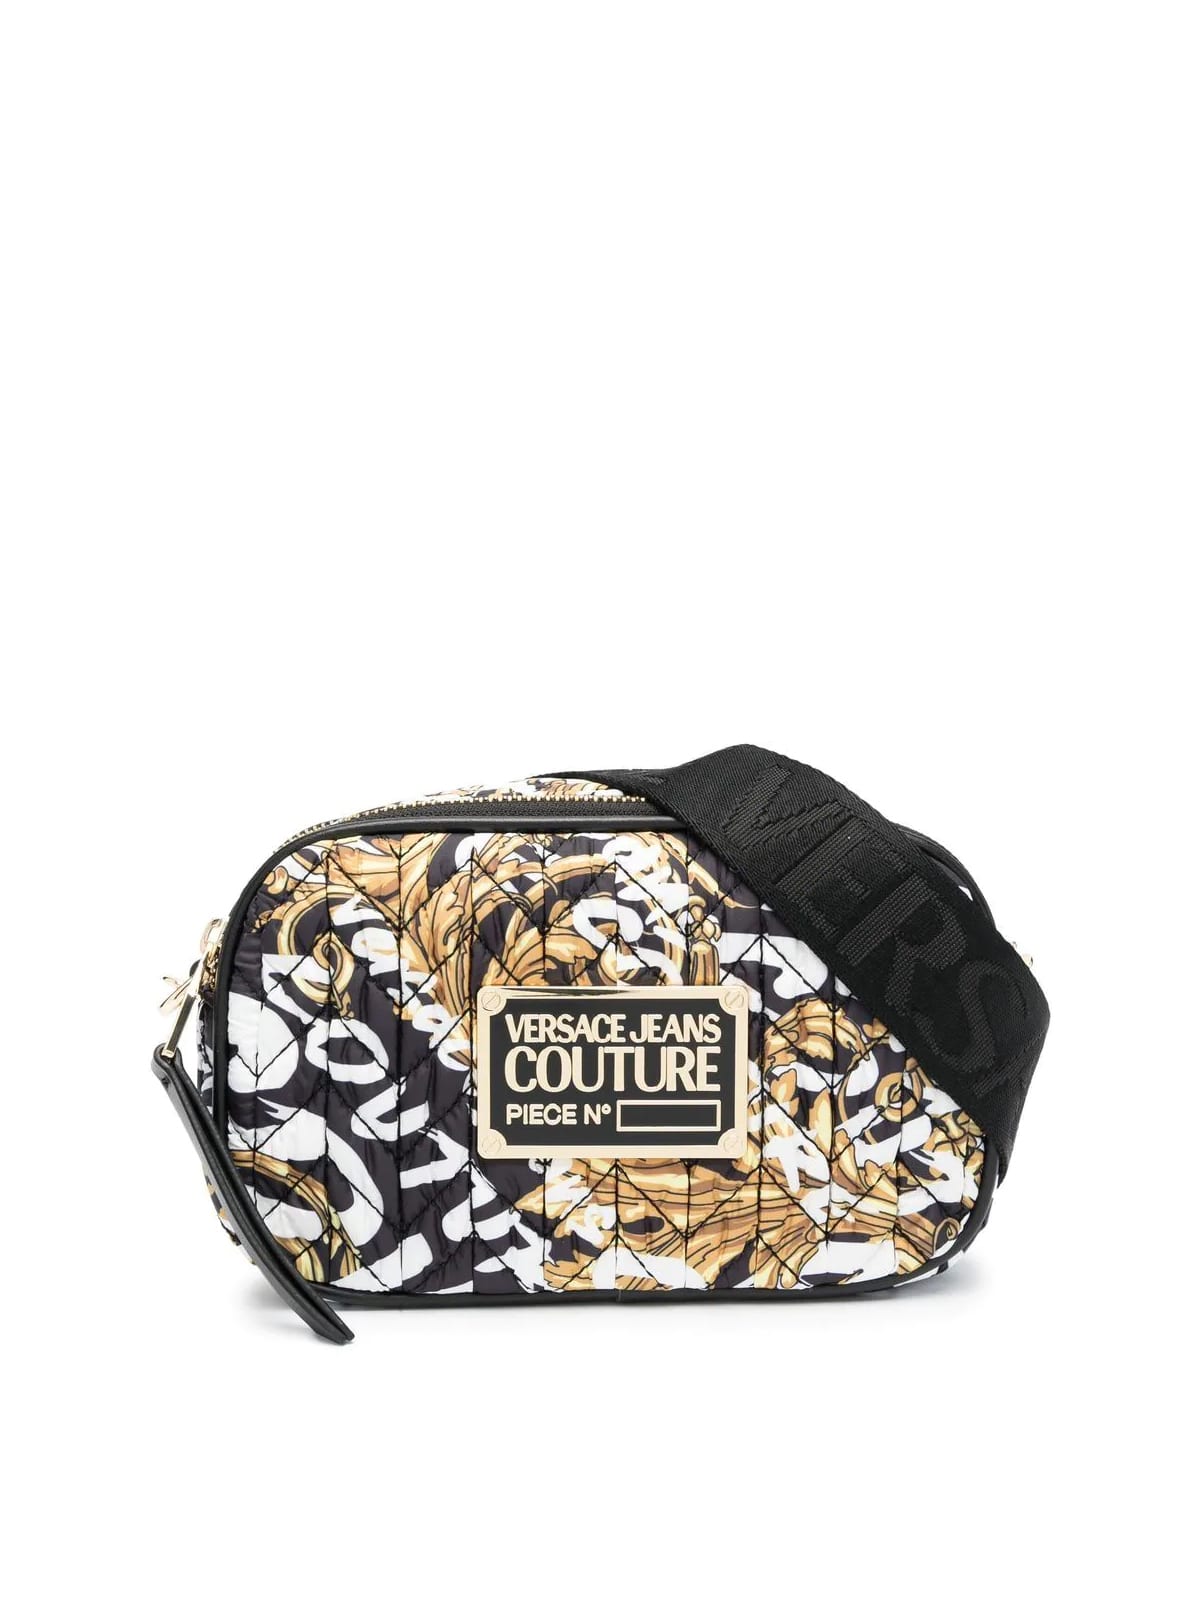 Versace Jeans Couture Range O Crunchy Bag Sketch 6 Quilted Crossbody Bag